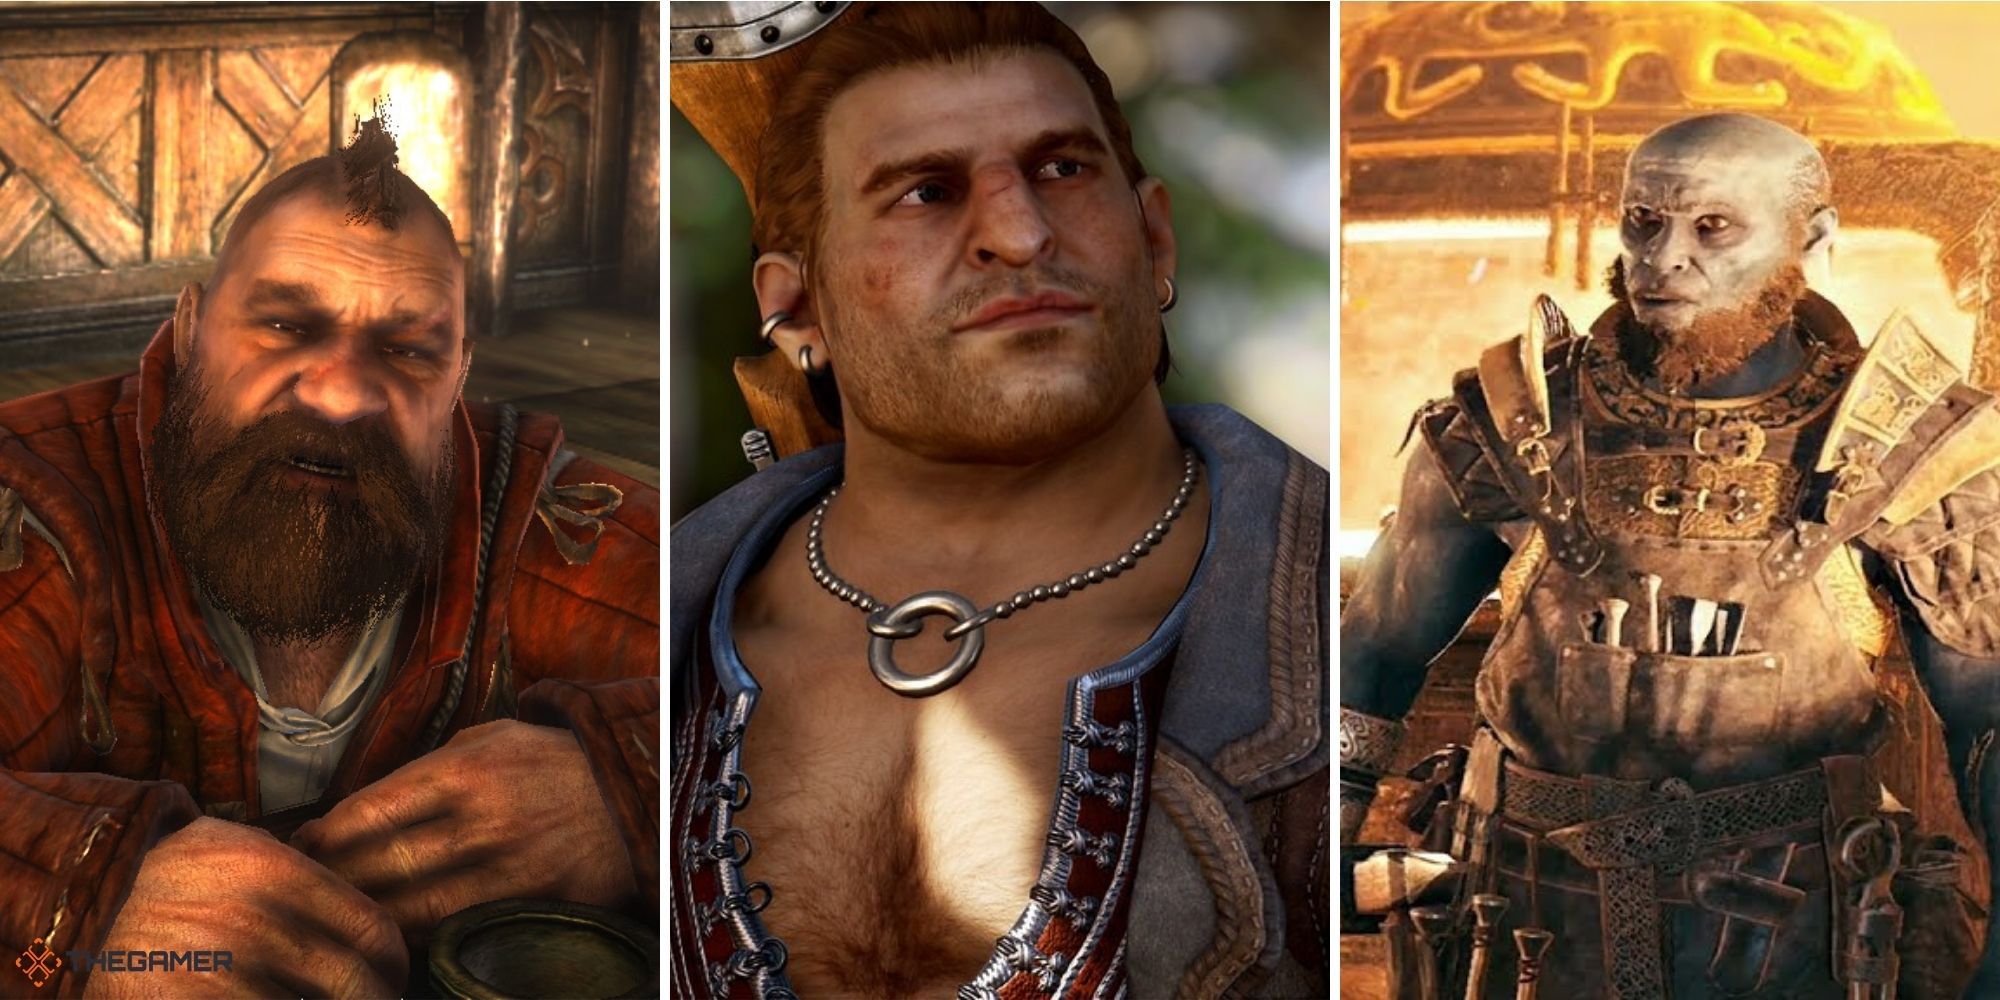 Dwarves in Video Games - God of War (right), Dragon Age Inquisition (centre), The Witcher (left)